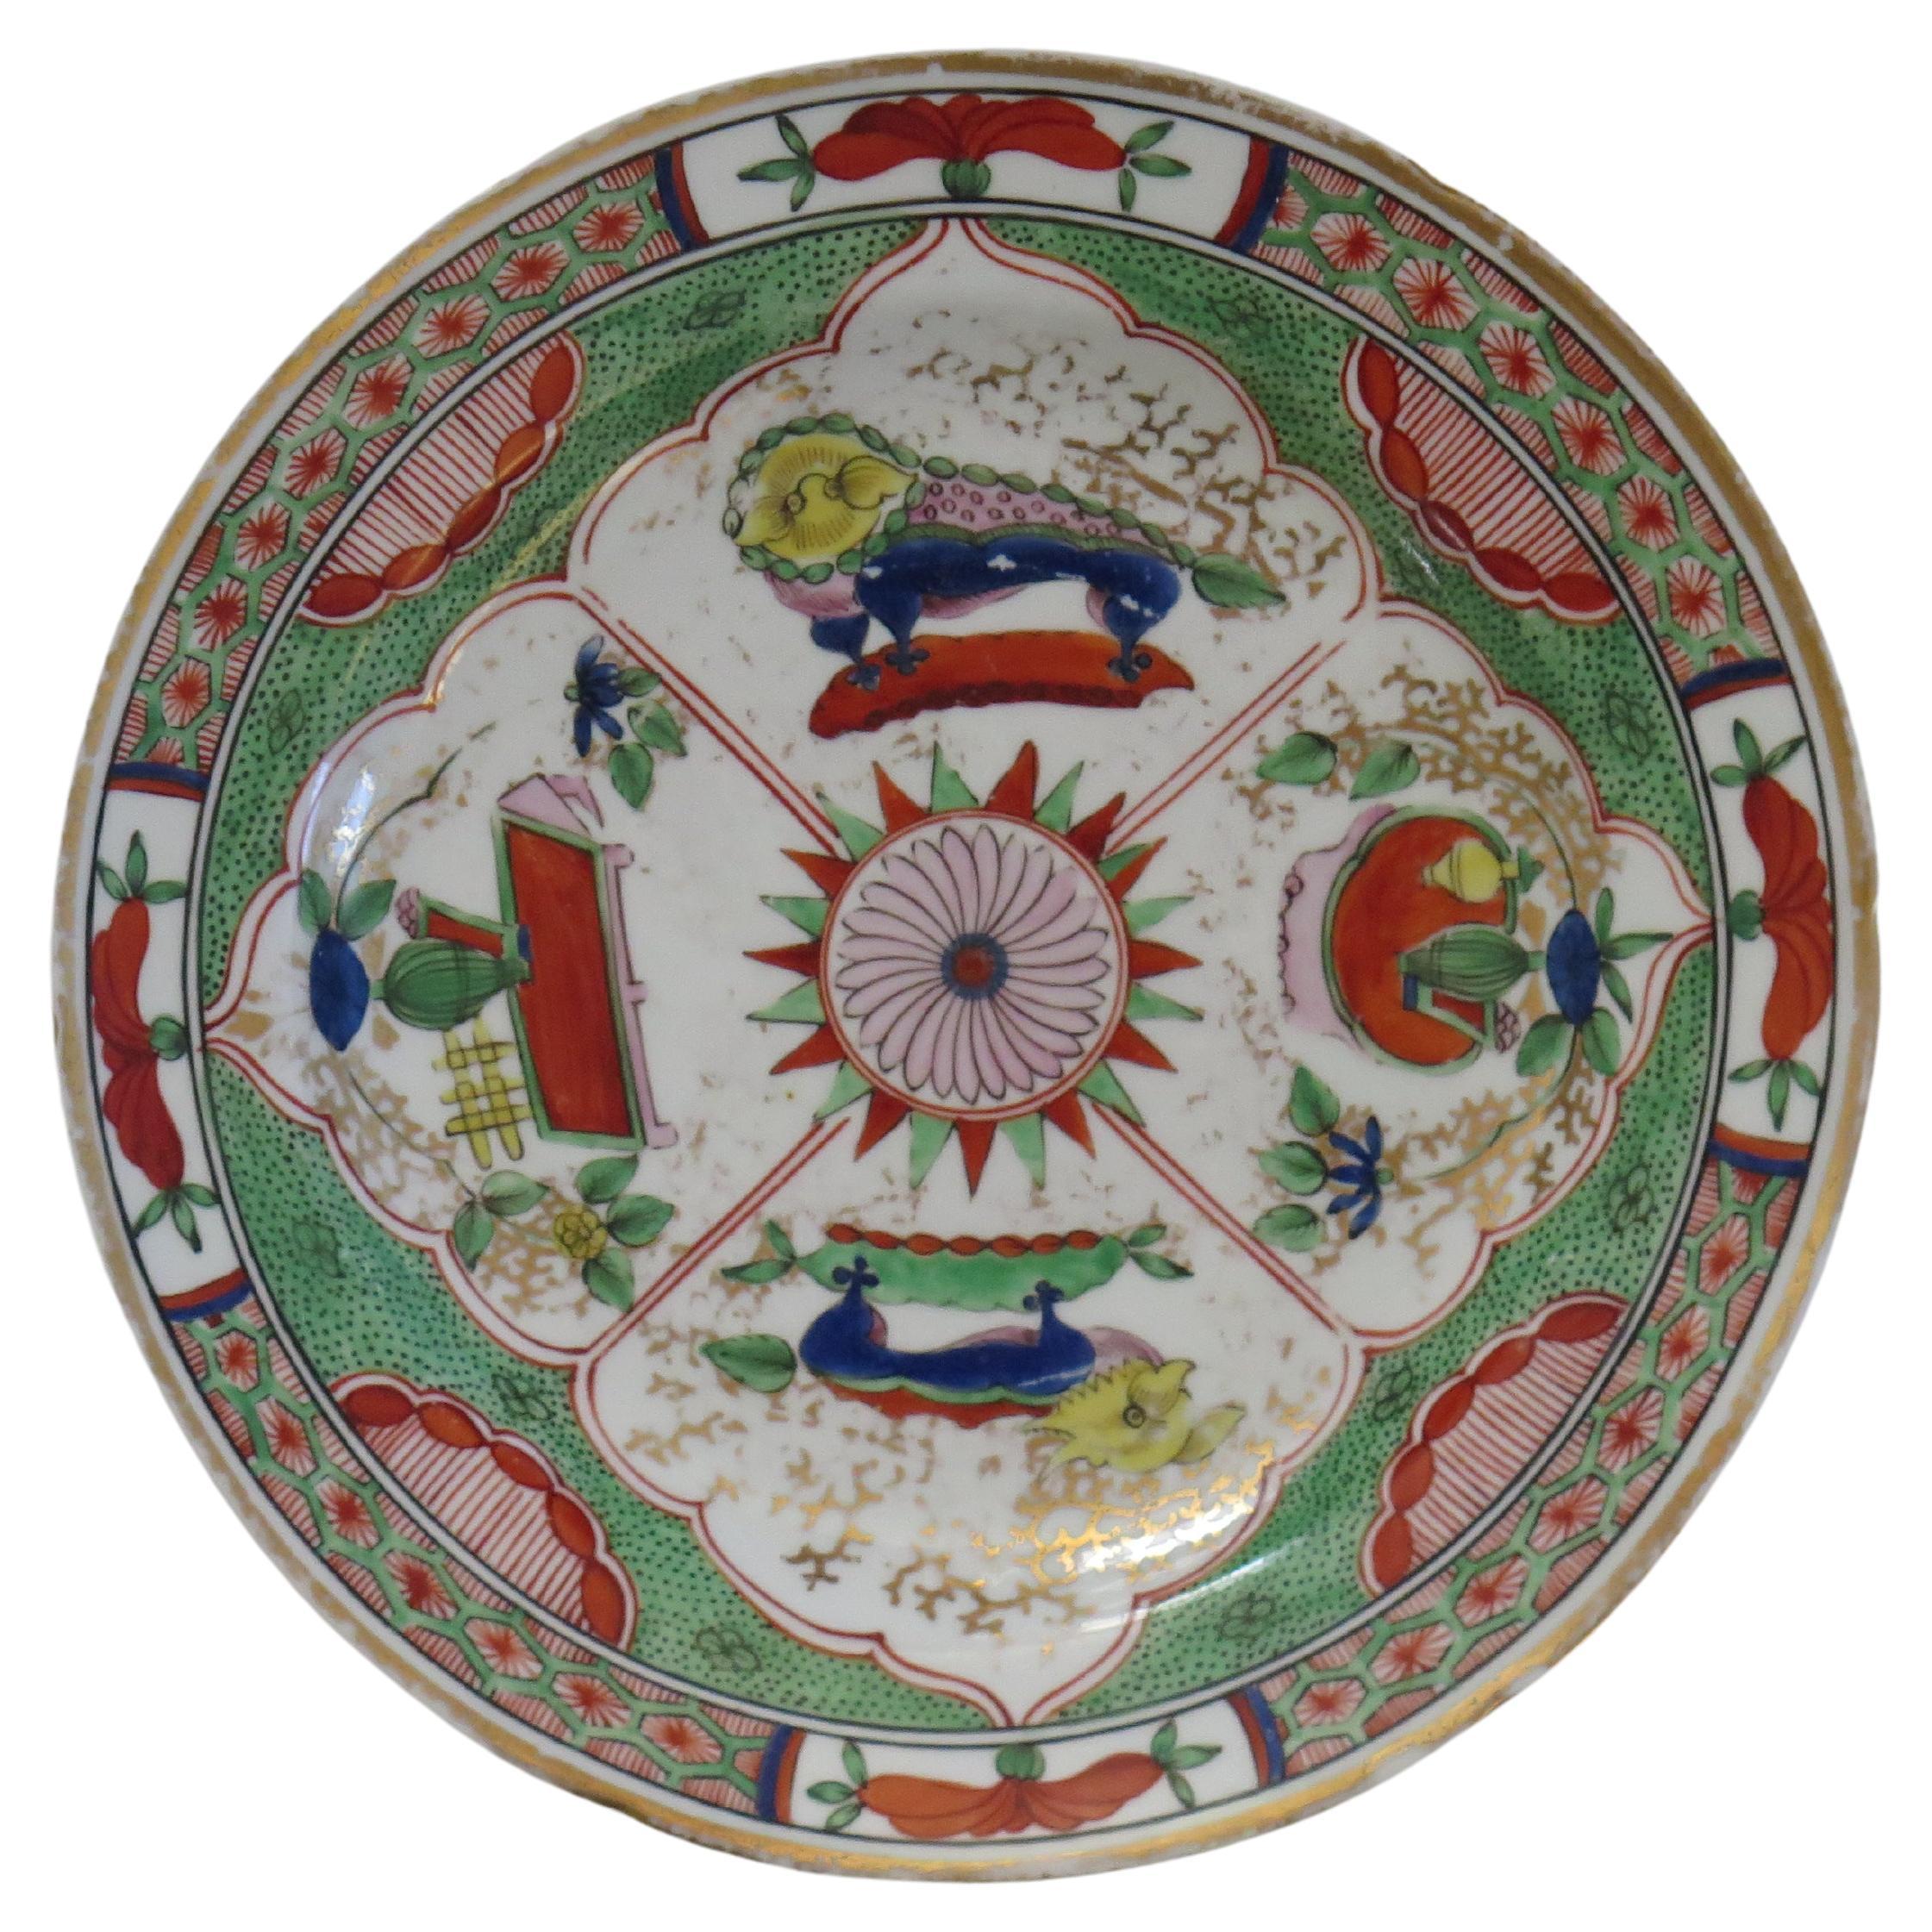 This is a good quality porcelain Plate or Dish, all hand painted in the Dragon in Compartments pattern, Number 75, by Chamberlains Worcester, dating to the George 111rd years, circa 1800.

This distinctive pattern, often called Bengal Tyger is well